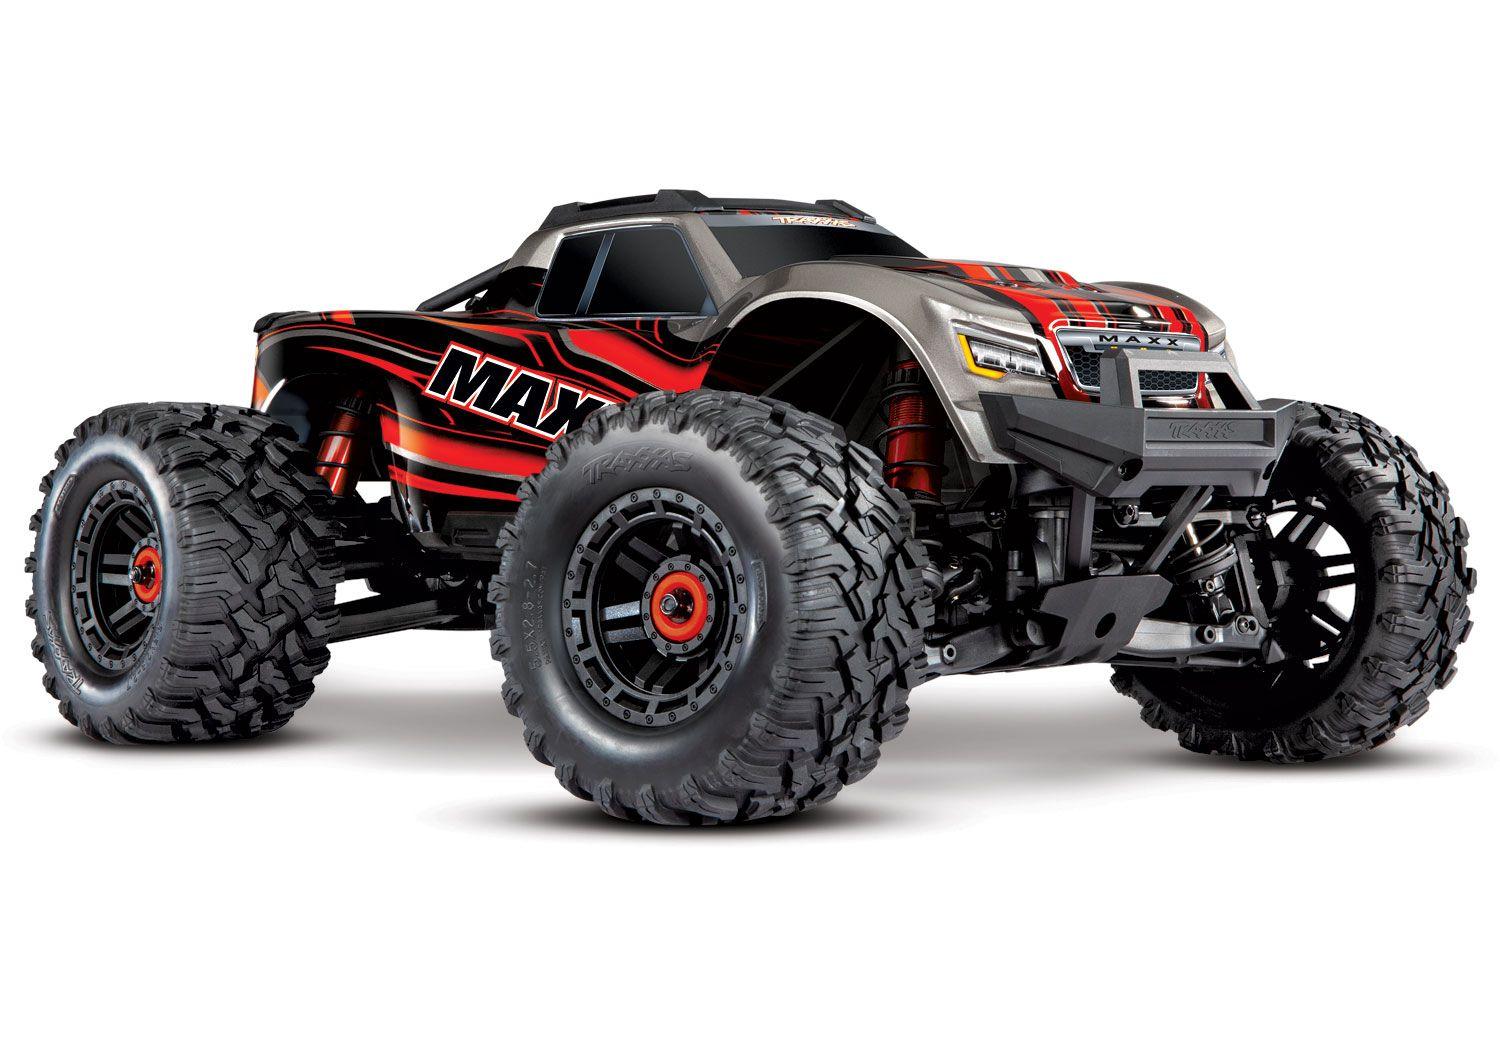 Hyper 7 Rc Car: Experience the Excitement of RC Car Racing with the Hyper 7: Unmatched Performance on Various Terrains